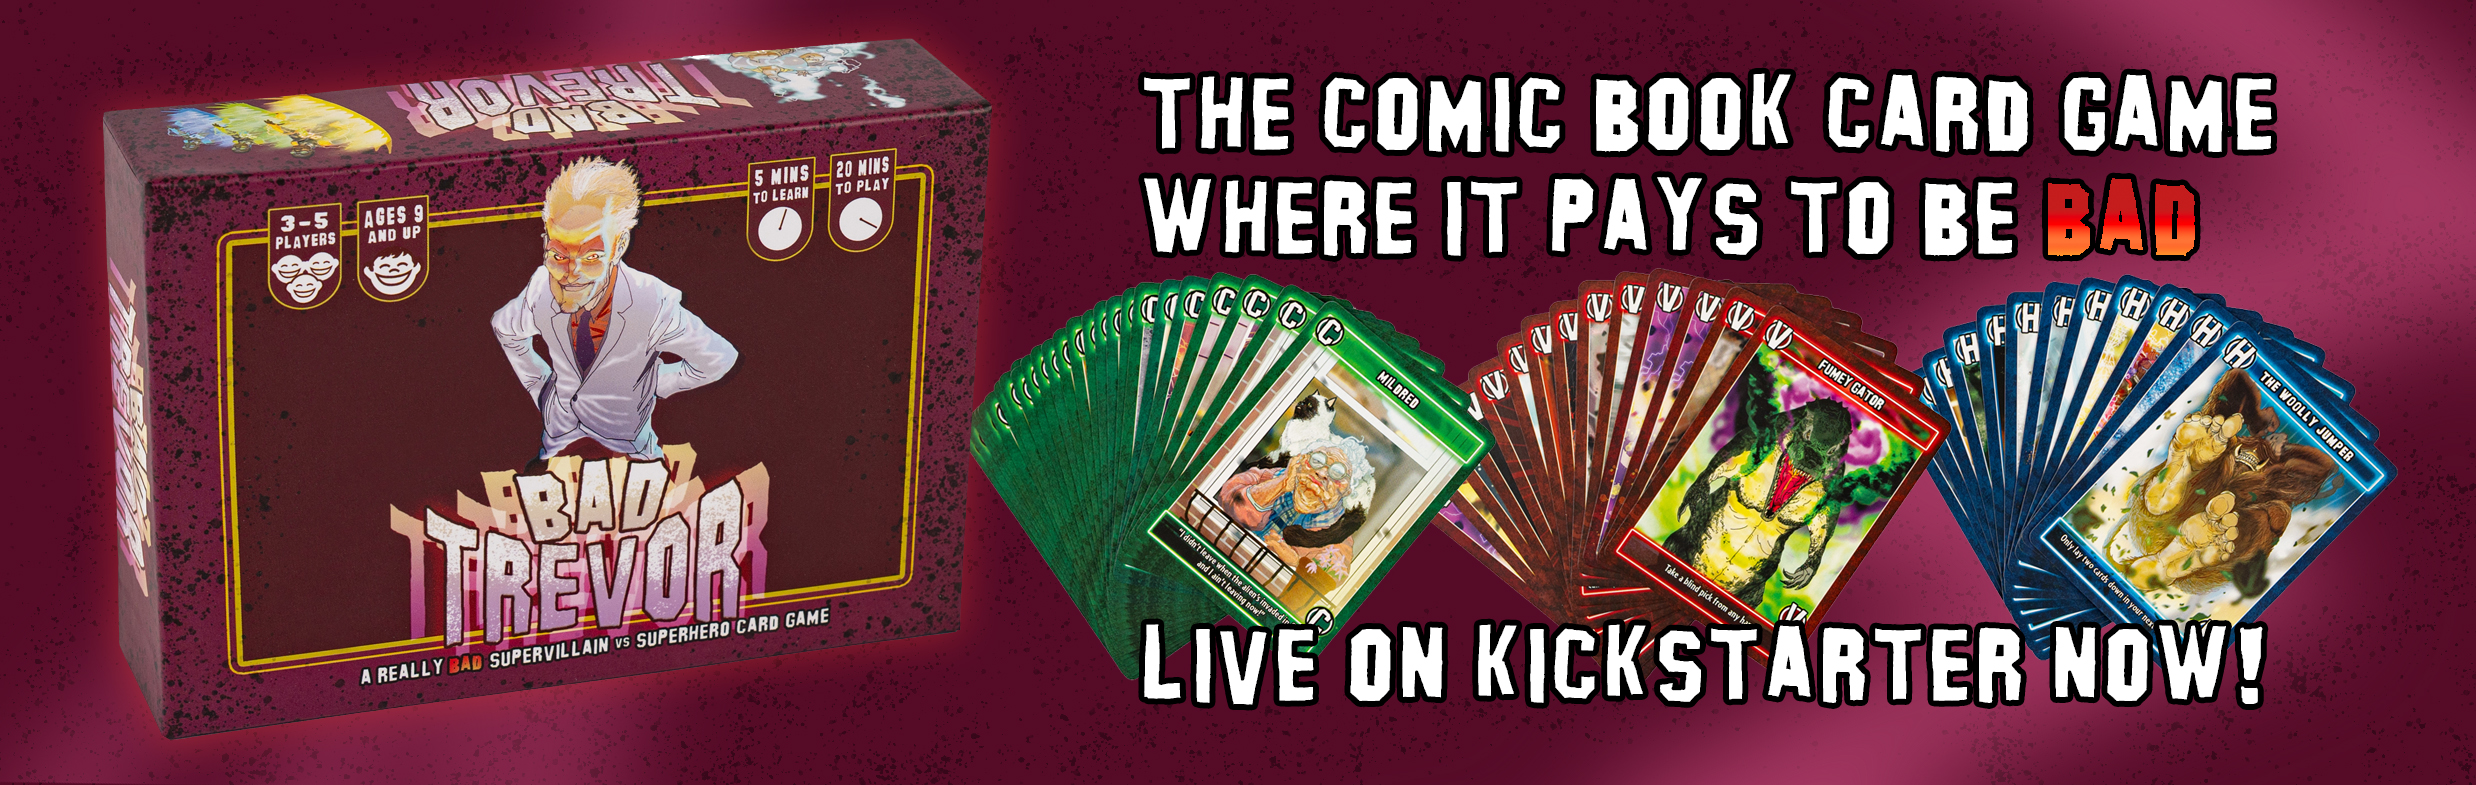 Bad Trevor- The comic book card game where it pays to be bas. Live now on Kickstarter!